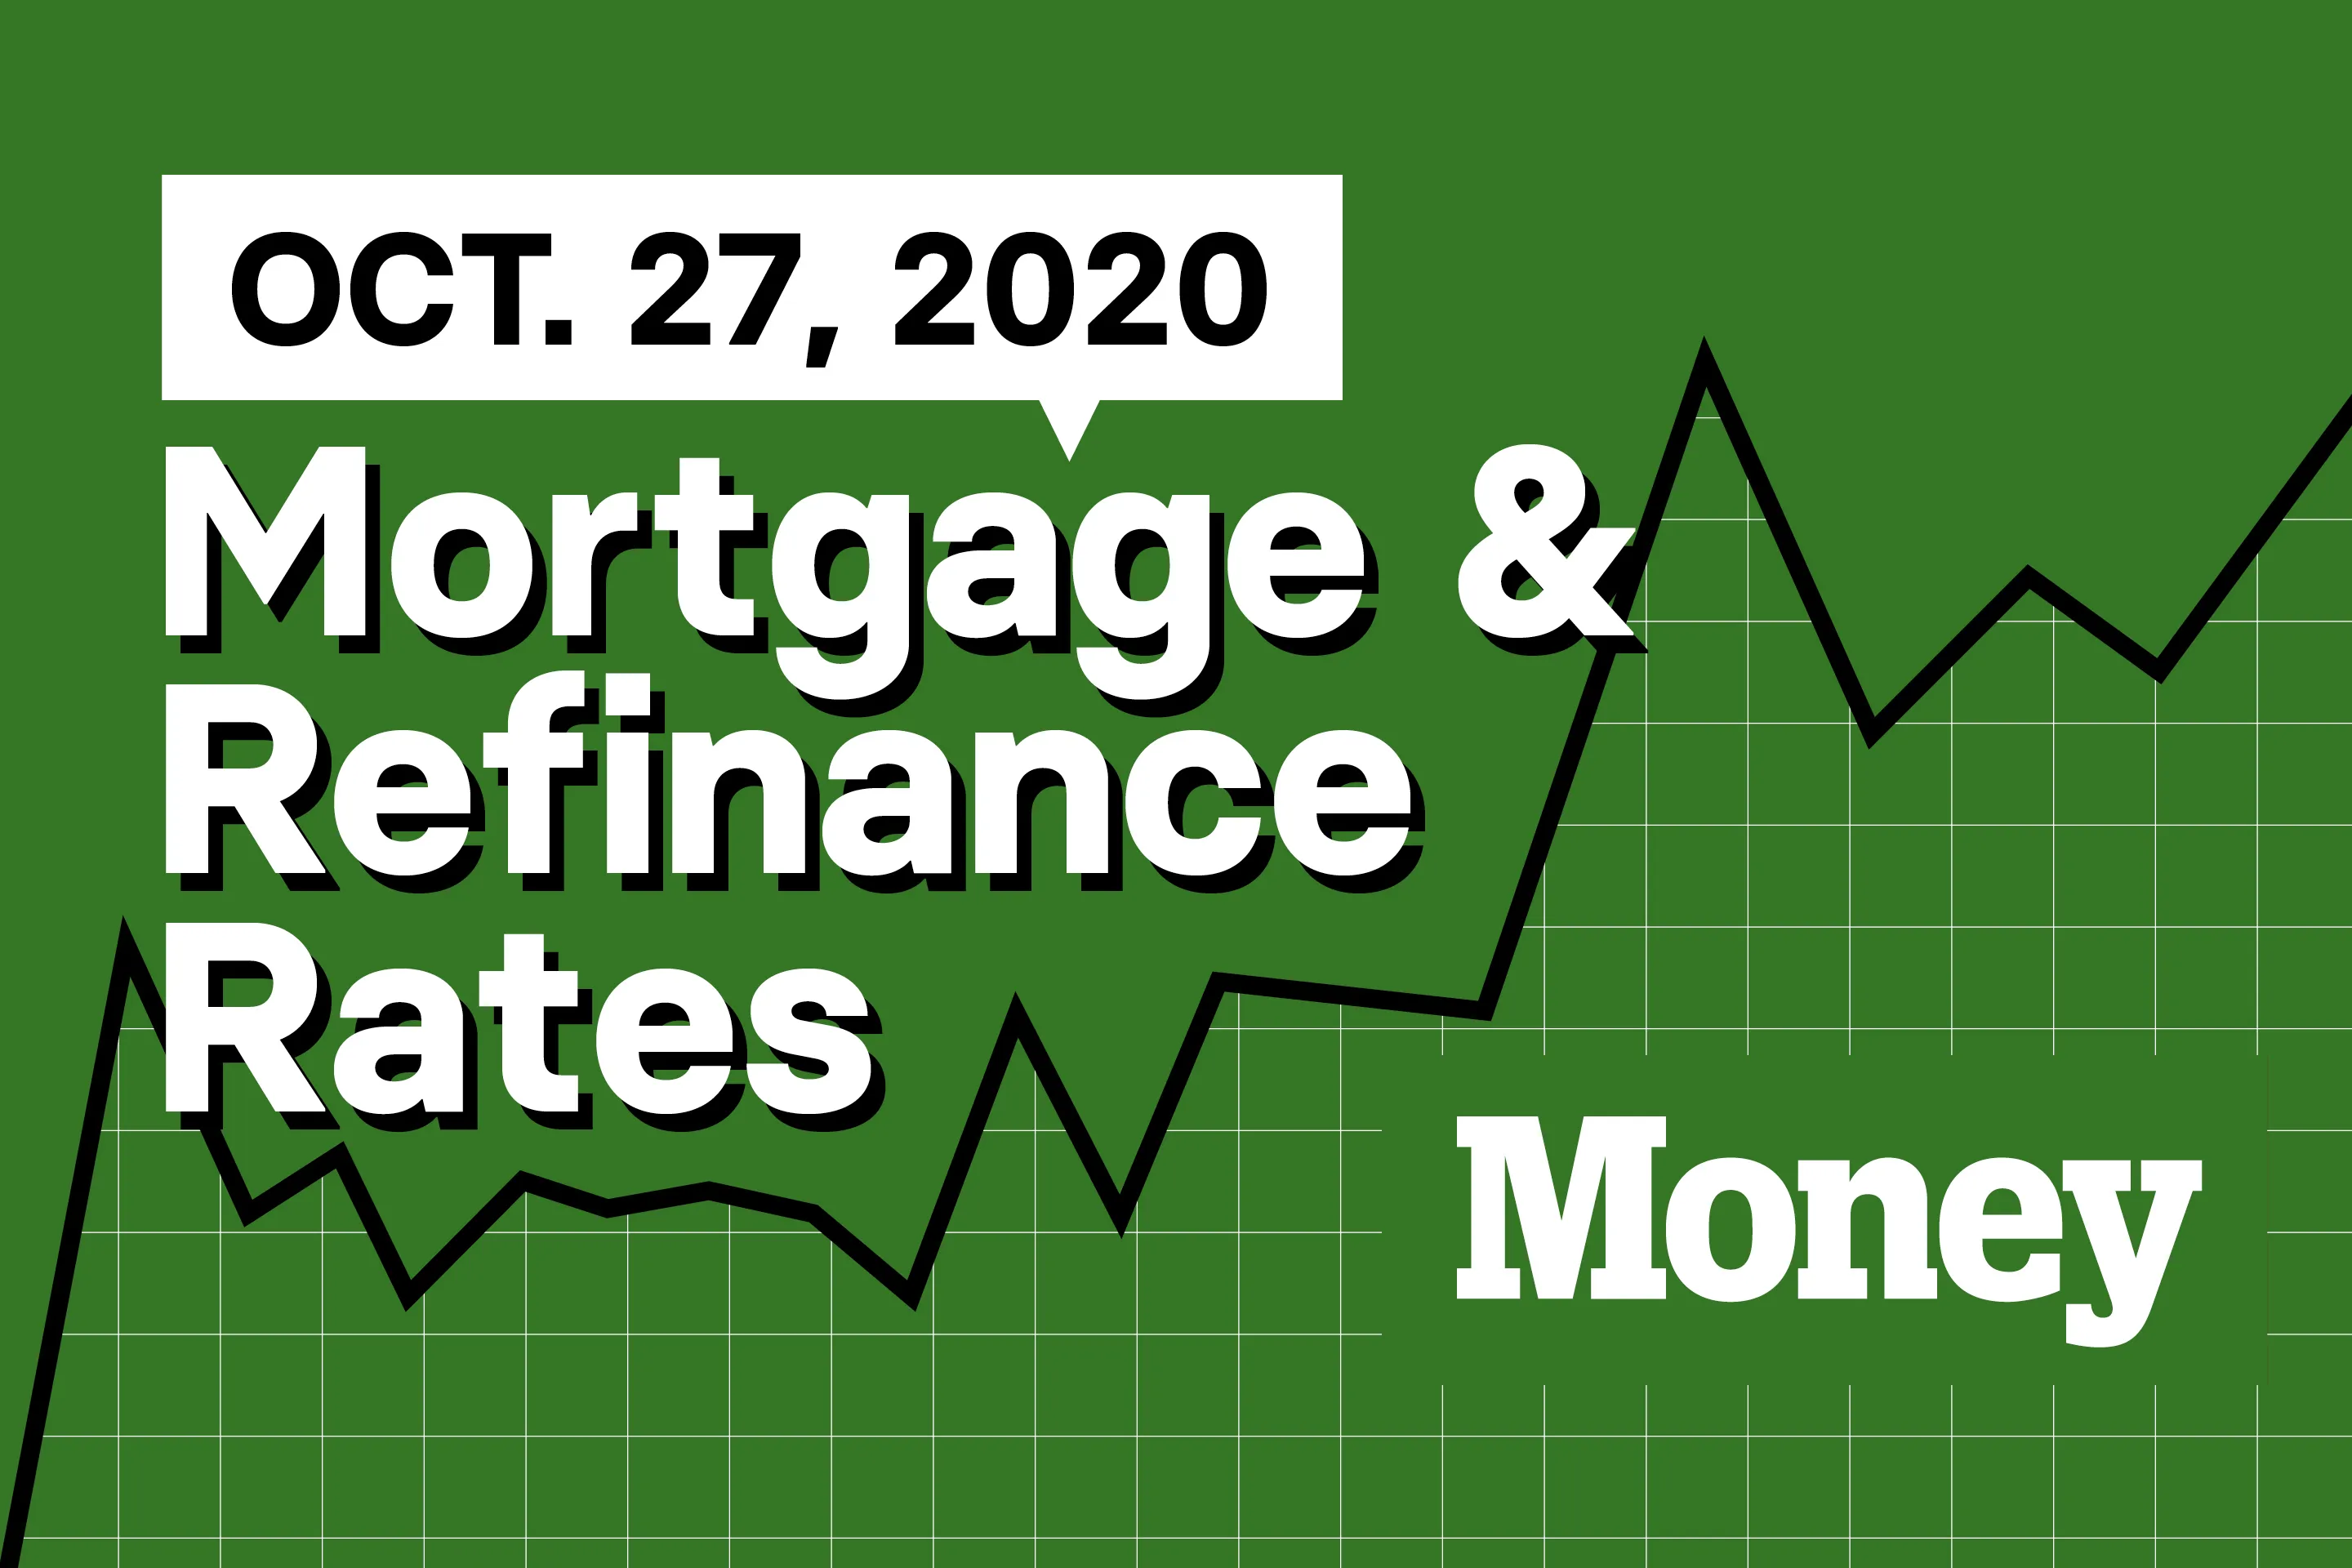 Here Are Today's Best Mortgage & Refinance Rates for October 27, 2020